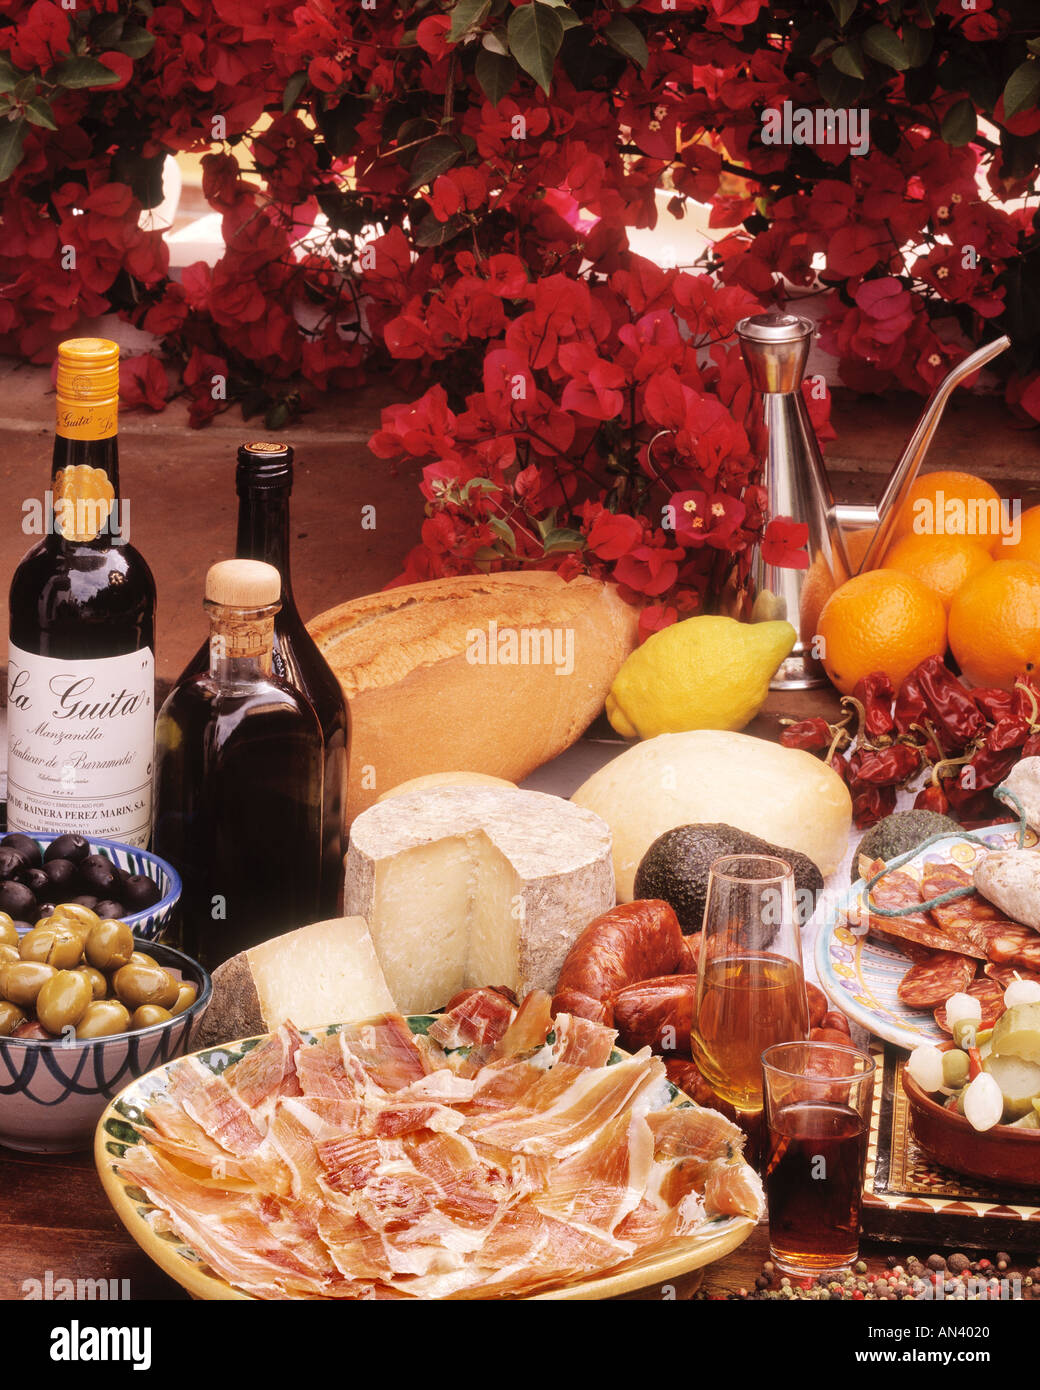 Spain olives cheeses wine sherry chorizo saussages ham all goodies from Andalusia  Stock Photo